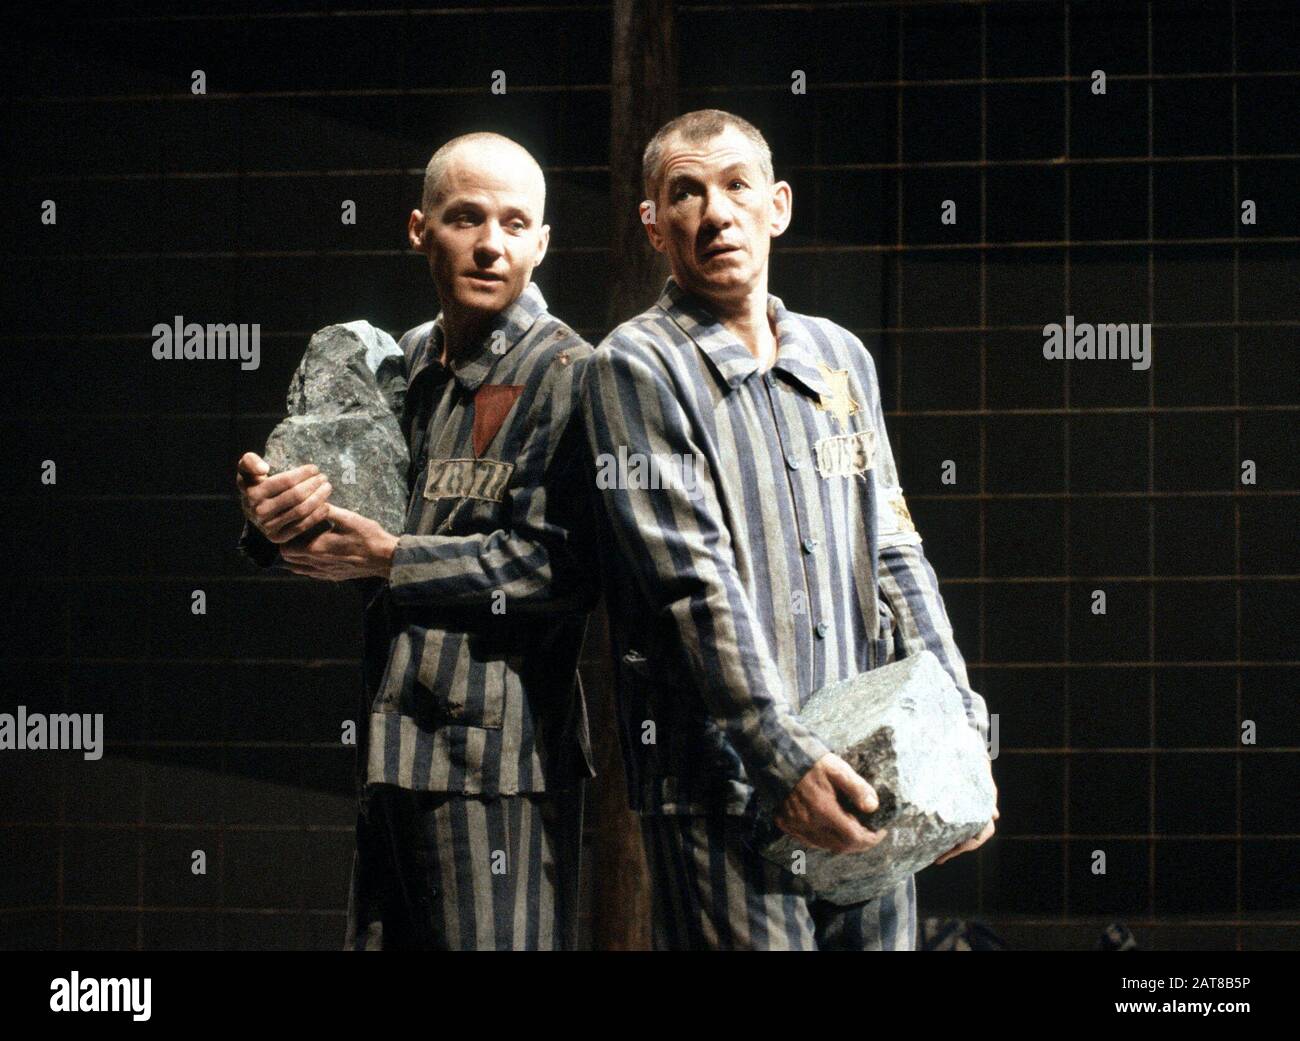 Michael Cashman (Horst) and Ian McKellen (Max) in BENT by Martin Sherman directed by Sean Mathias at the Lyttelton Theatre, National Theatre (NT), London in 1990. Sir Ian Murray McKellen, born 1939, Burnley, England. English stage and film actor. Co-founder of Stonewall, gay rights activist, knighted in 1990, made a Companion of Honour 2007. Stock Photo